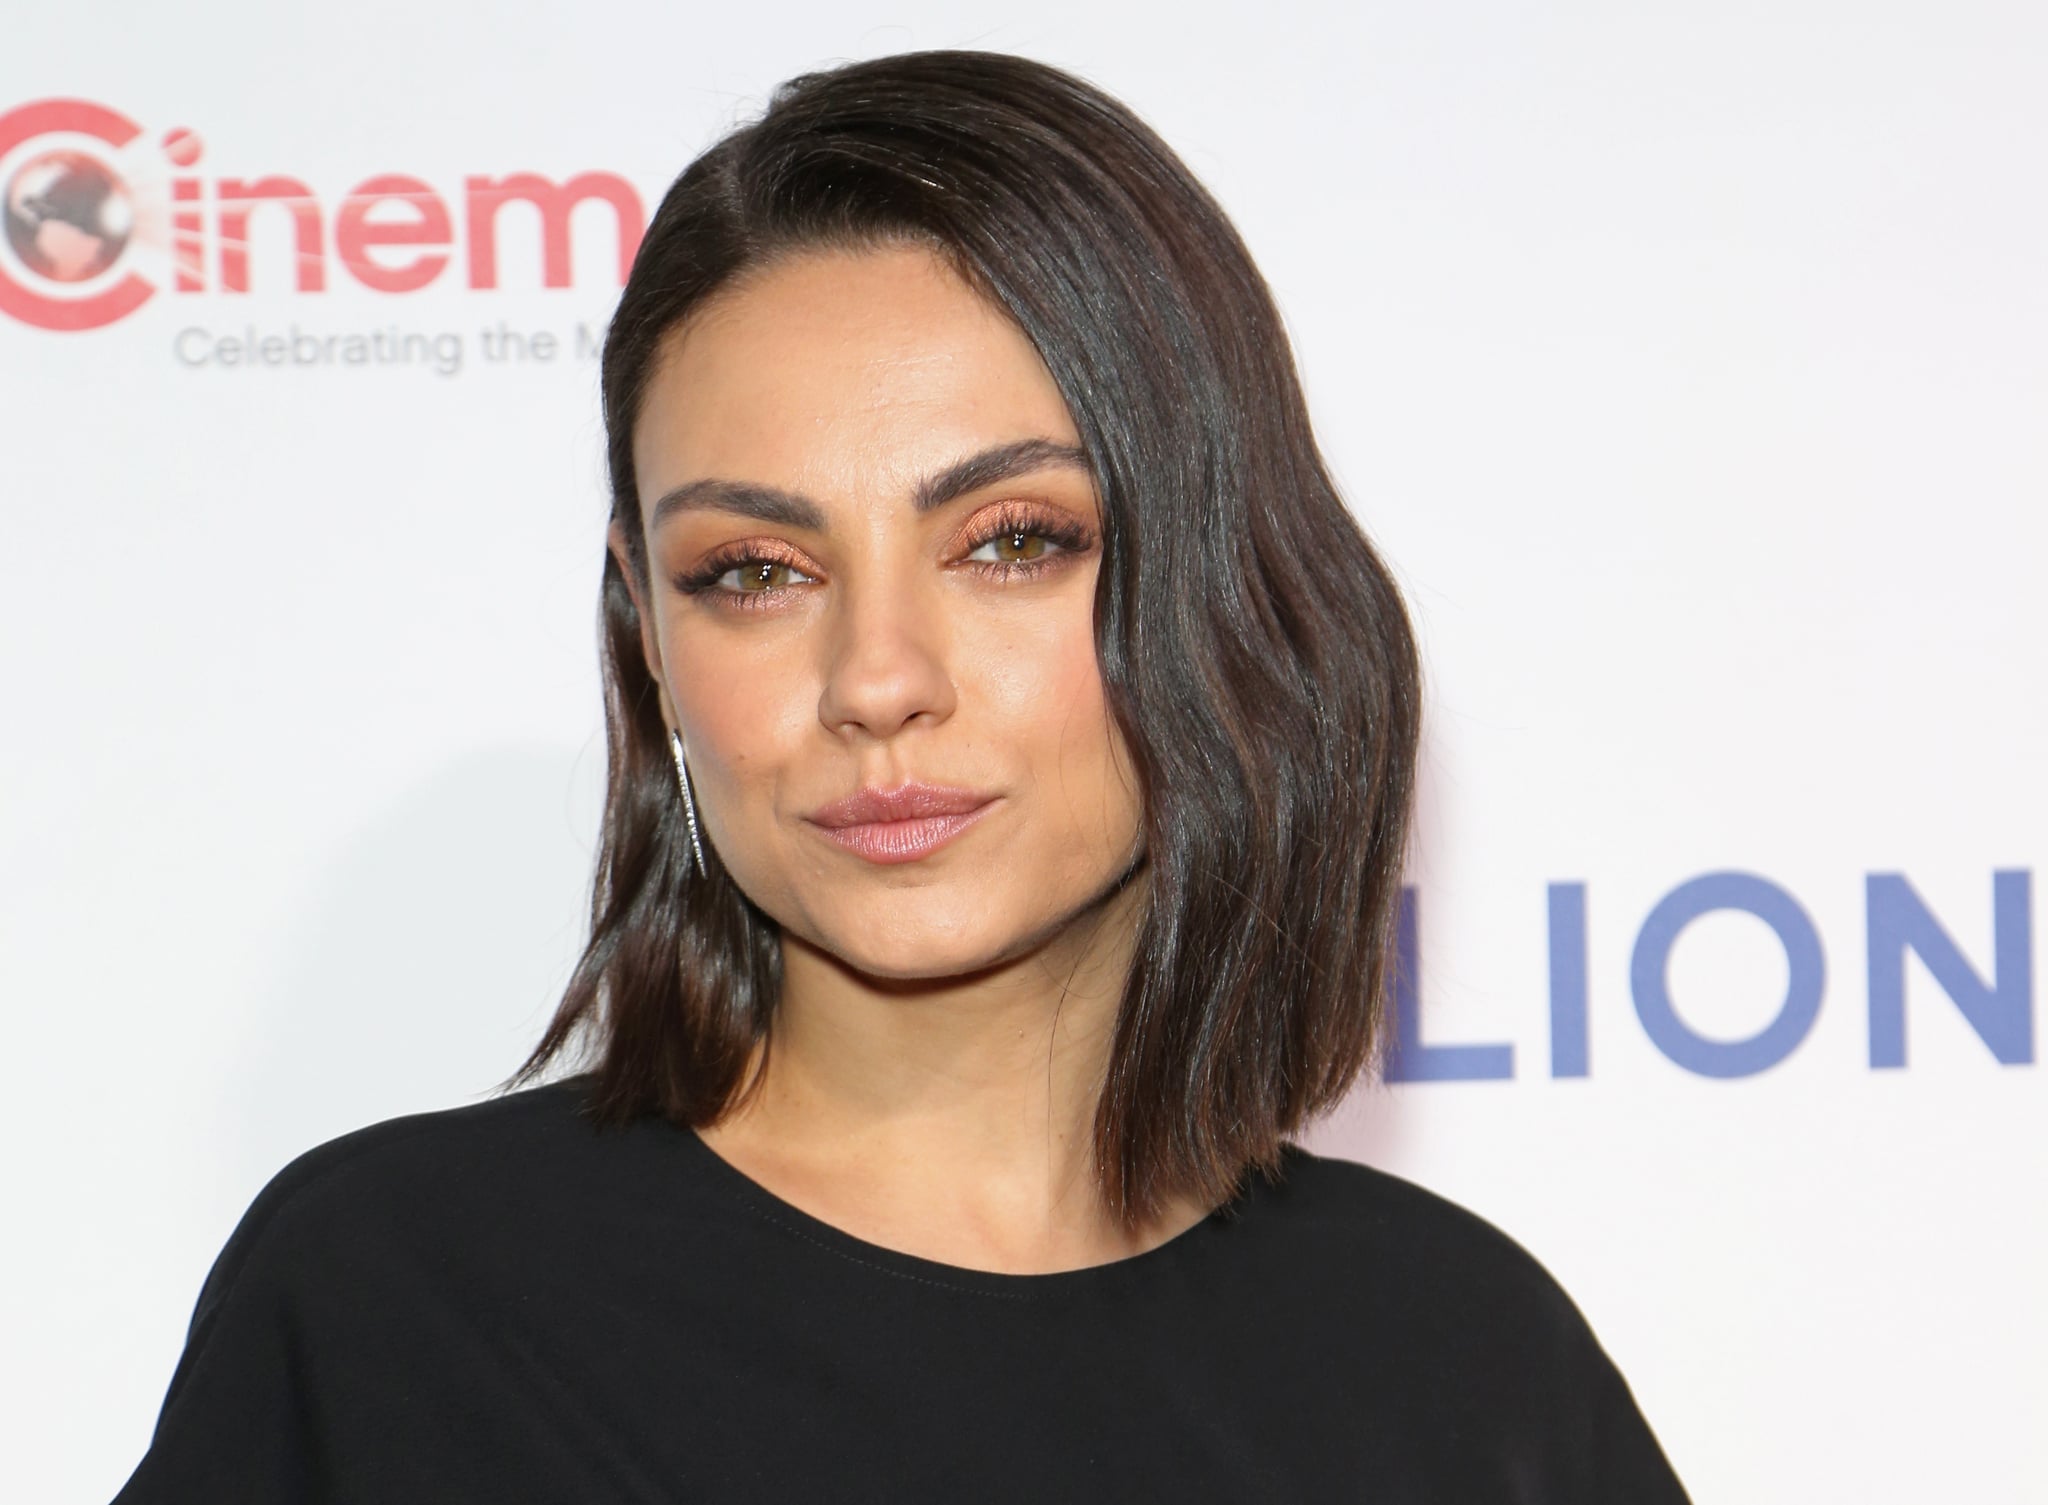 LAS VEGAS, NV - APRIL 26:  Actress Mila Kunis attends CinemaCon 2018 Lionsgate Invites You to An Exclusive Presentation Highlighting Its 2018 Summer and Beyond at The Colosseum at Caesars Palace during CinemaCon, the official convention of the National Association of Theatre Owners, on April 26, 2018 in Las Vegas, Nevada.  (Photo by Gabe Ginsberg/Getty Images)